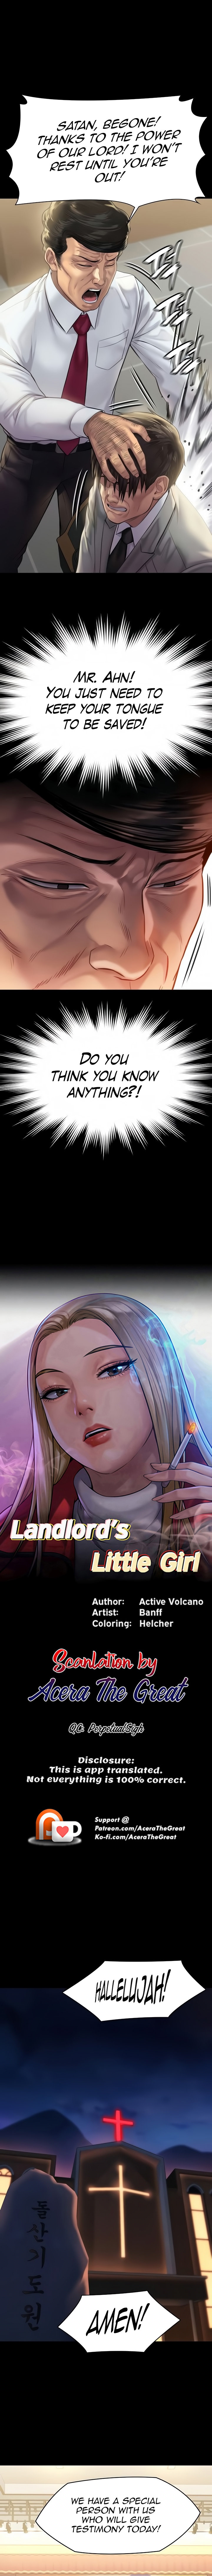 Panel Image 1 for chapter 209 of manhwa Queen Bee on read.oppai.stream